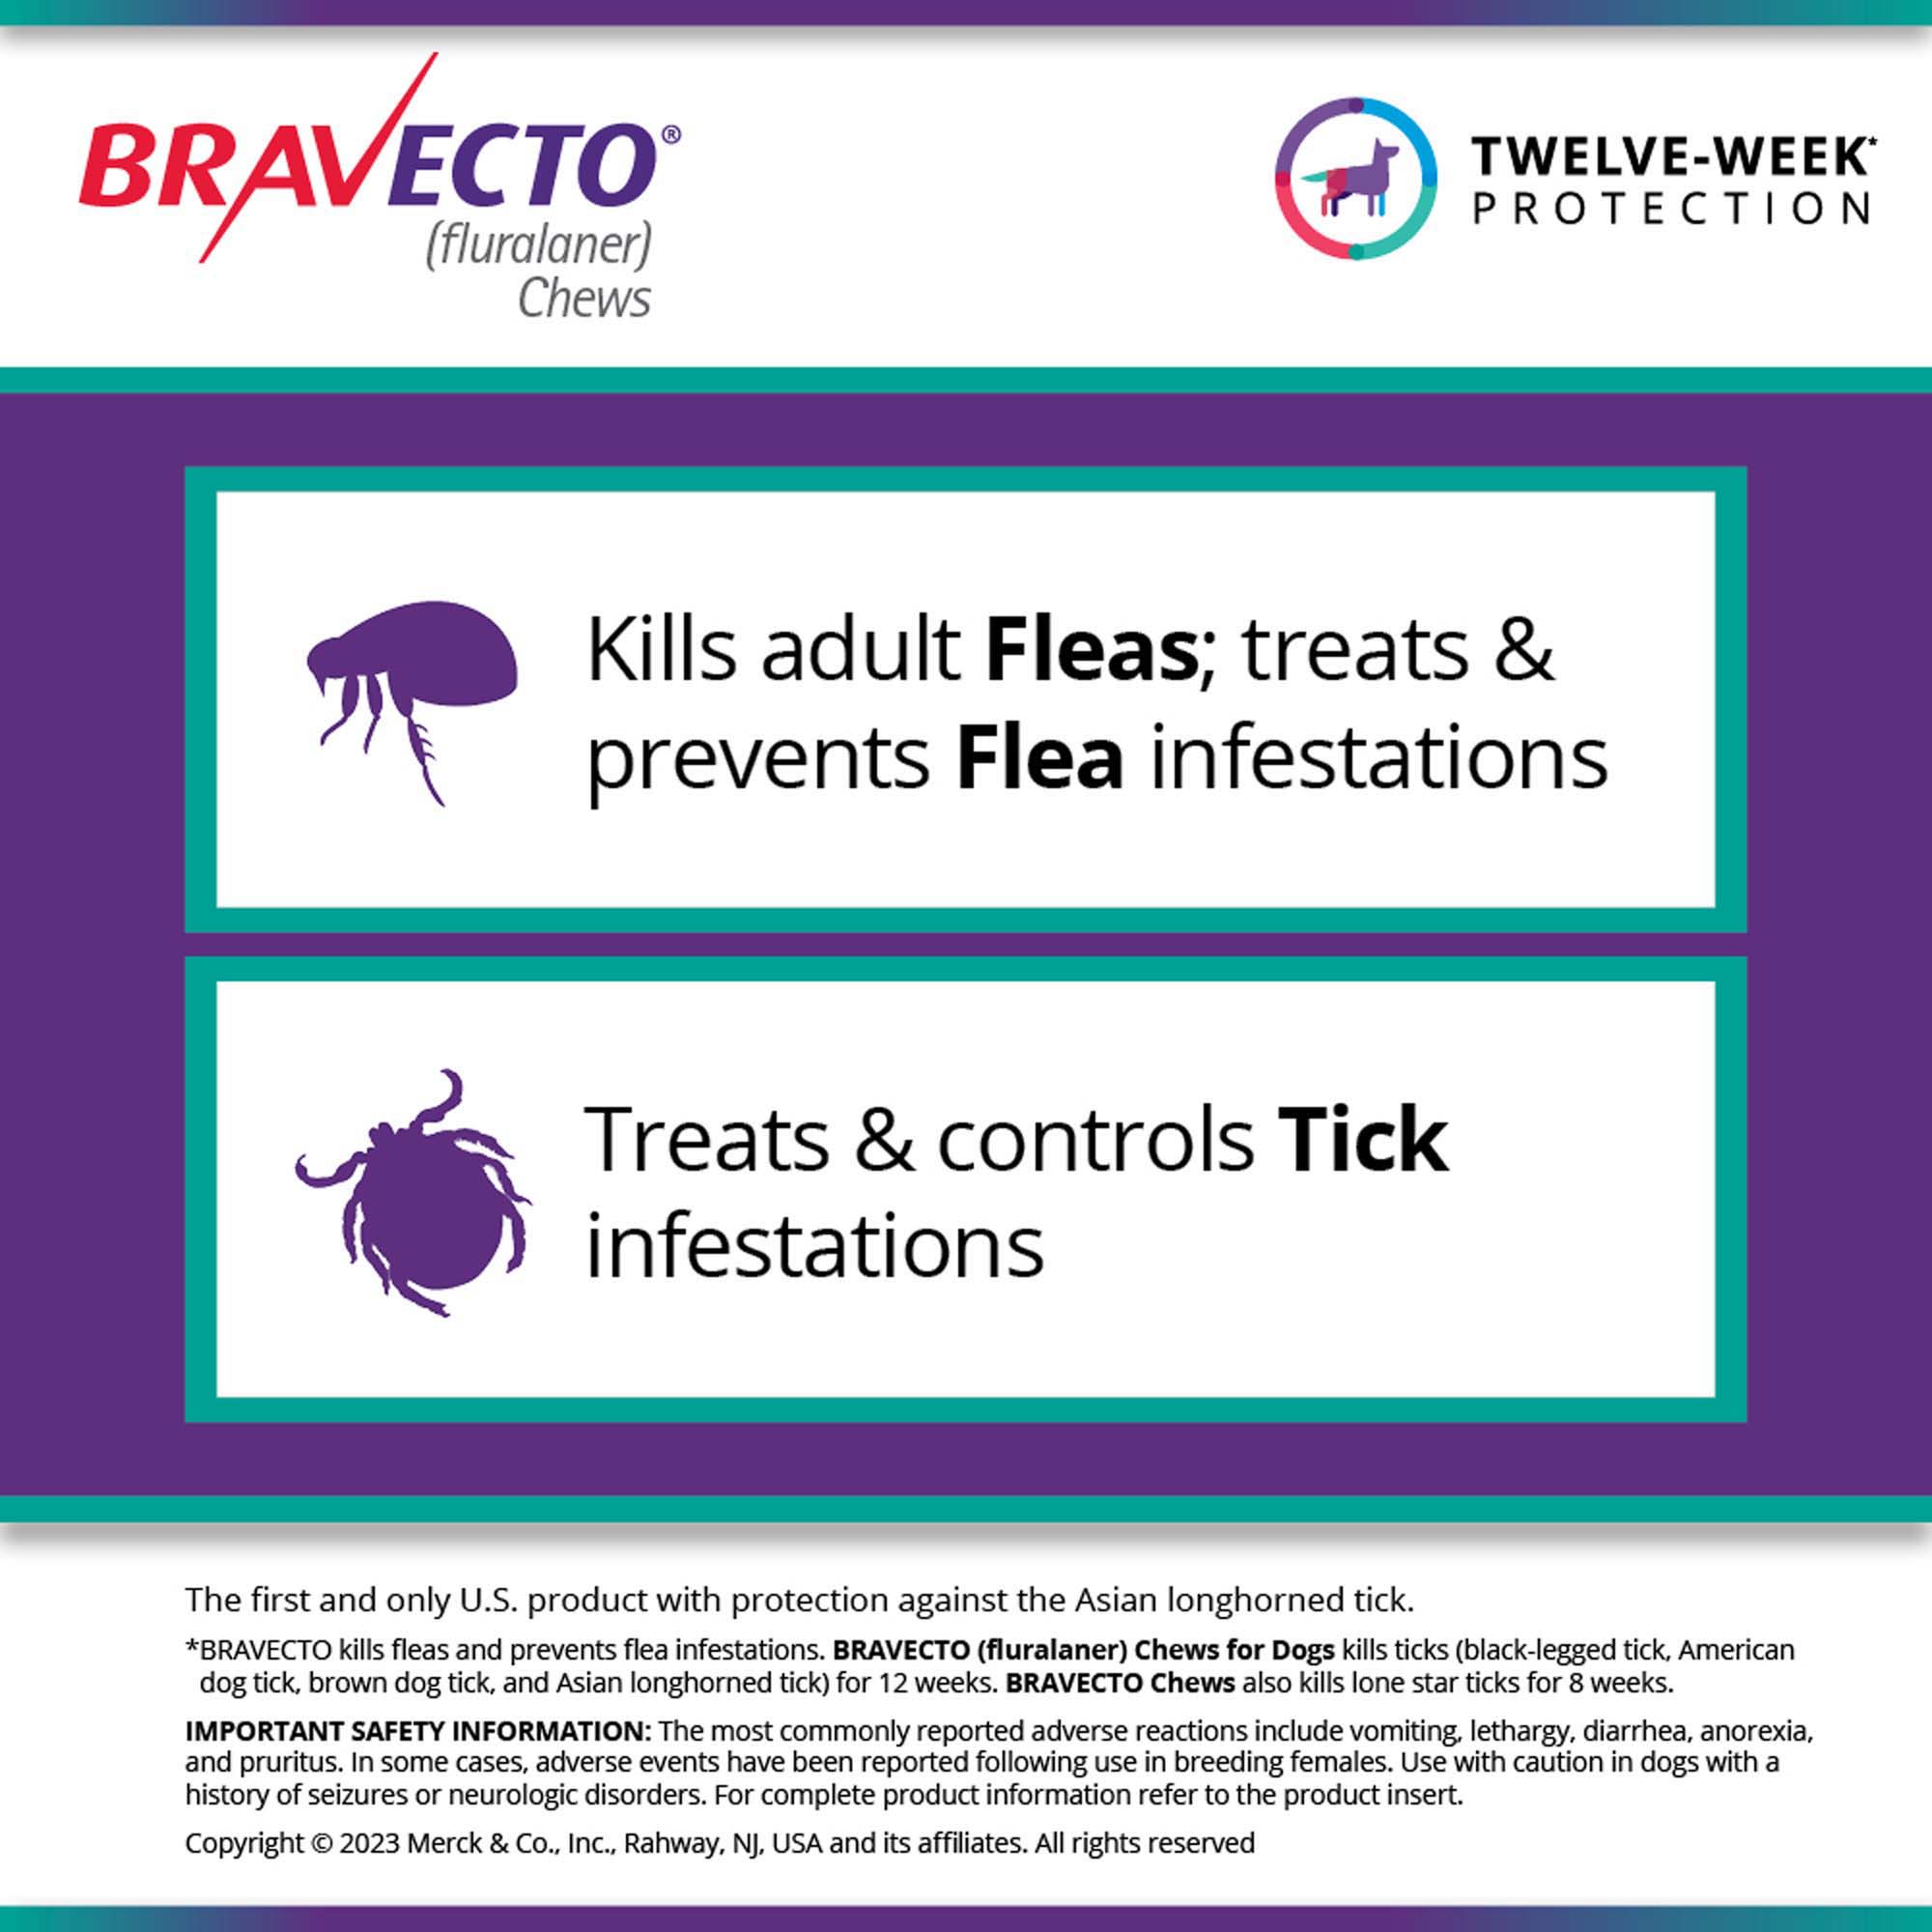 Bravecto Chews For Dogs 44-88 Lbs, 3 Month Supply, Petco